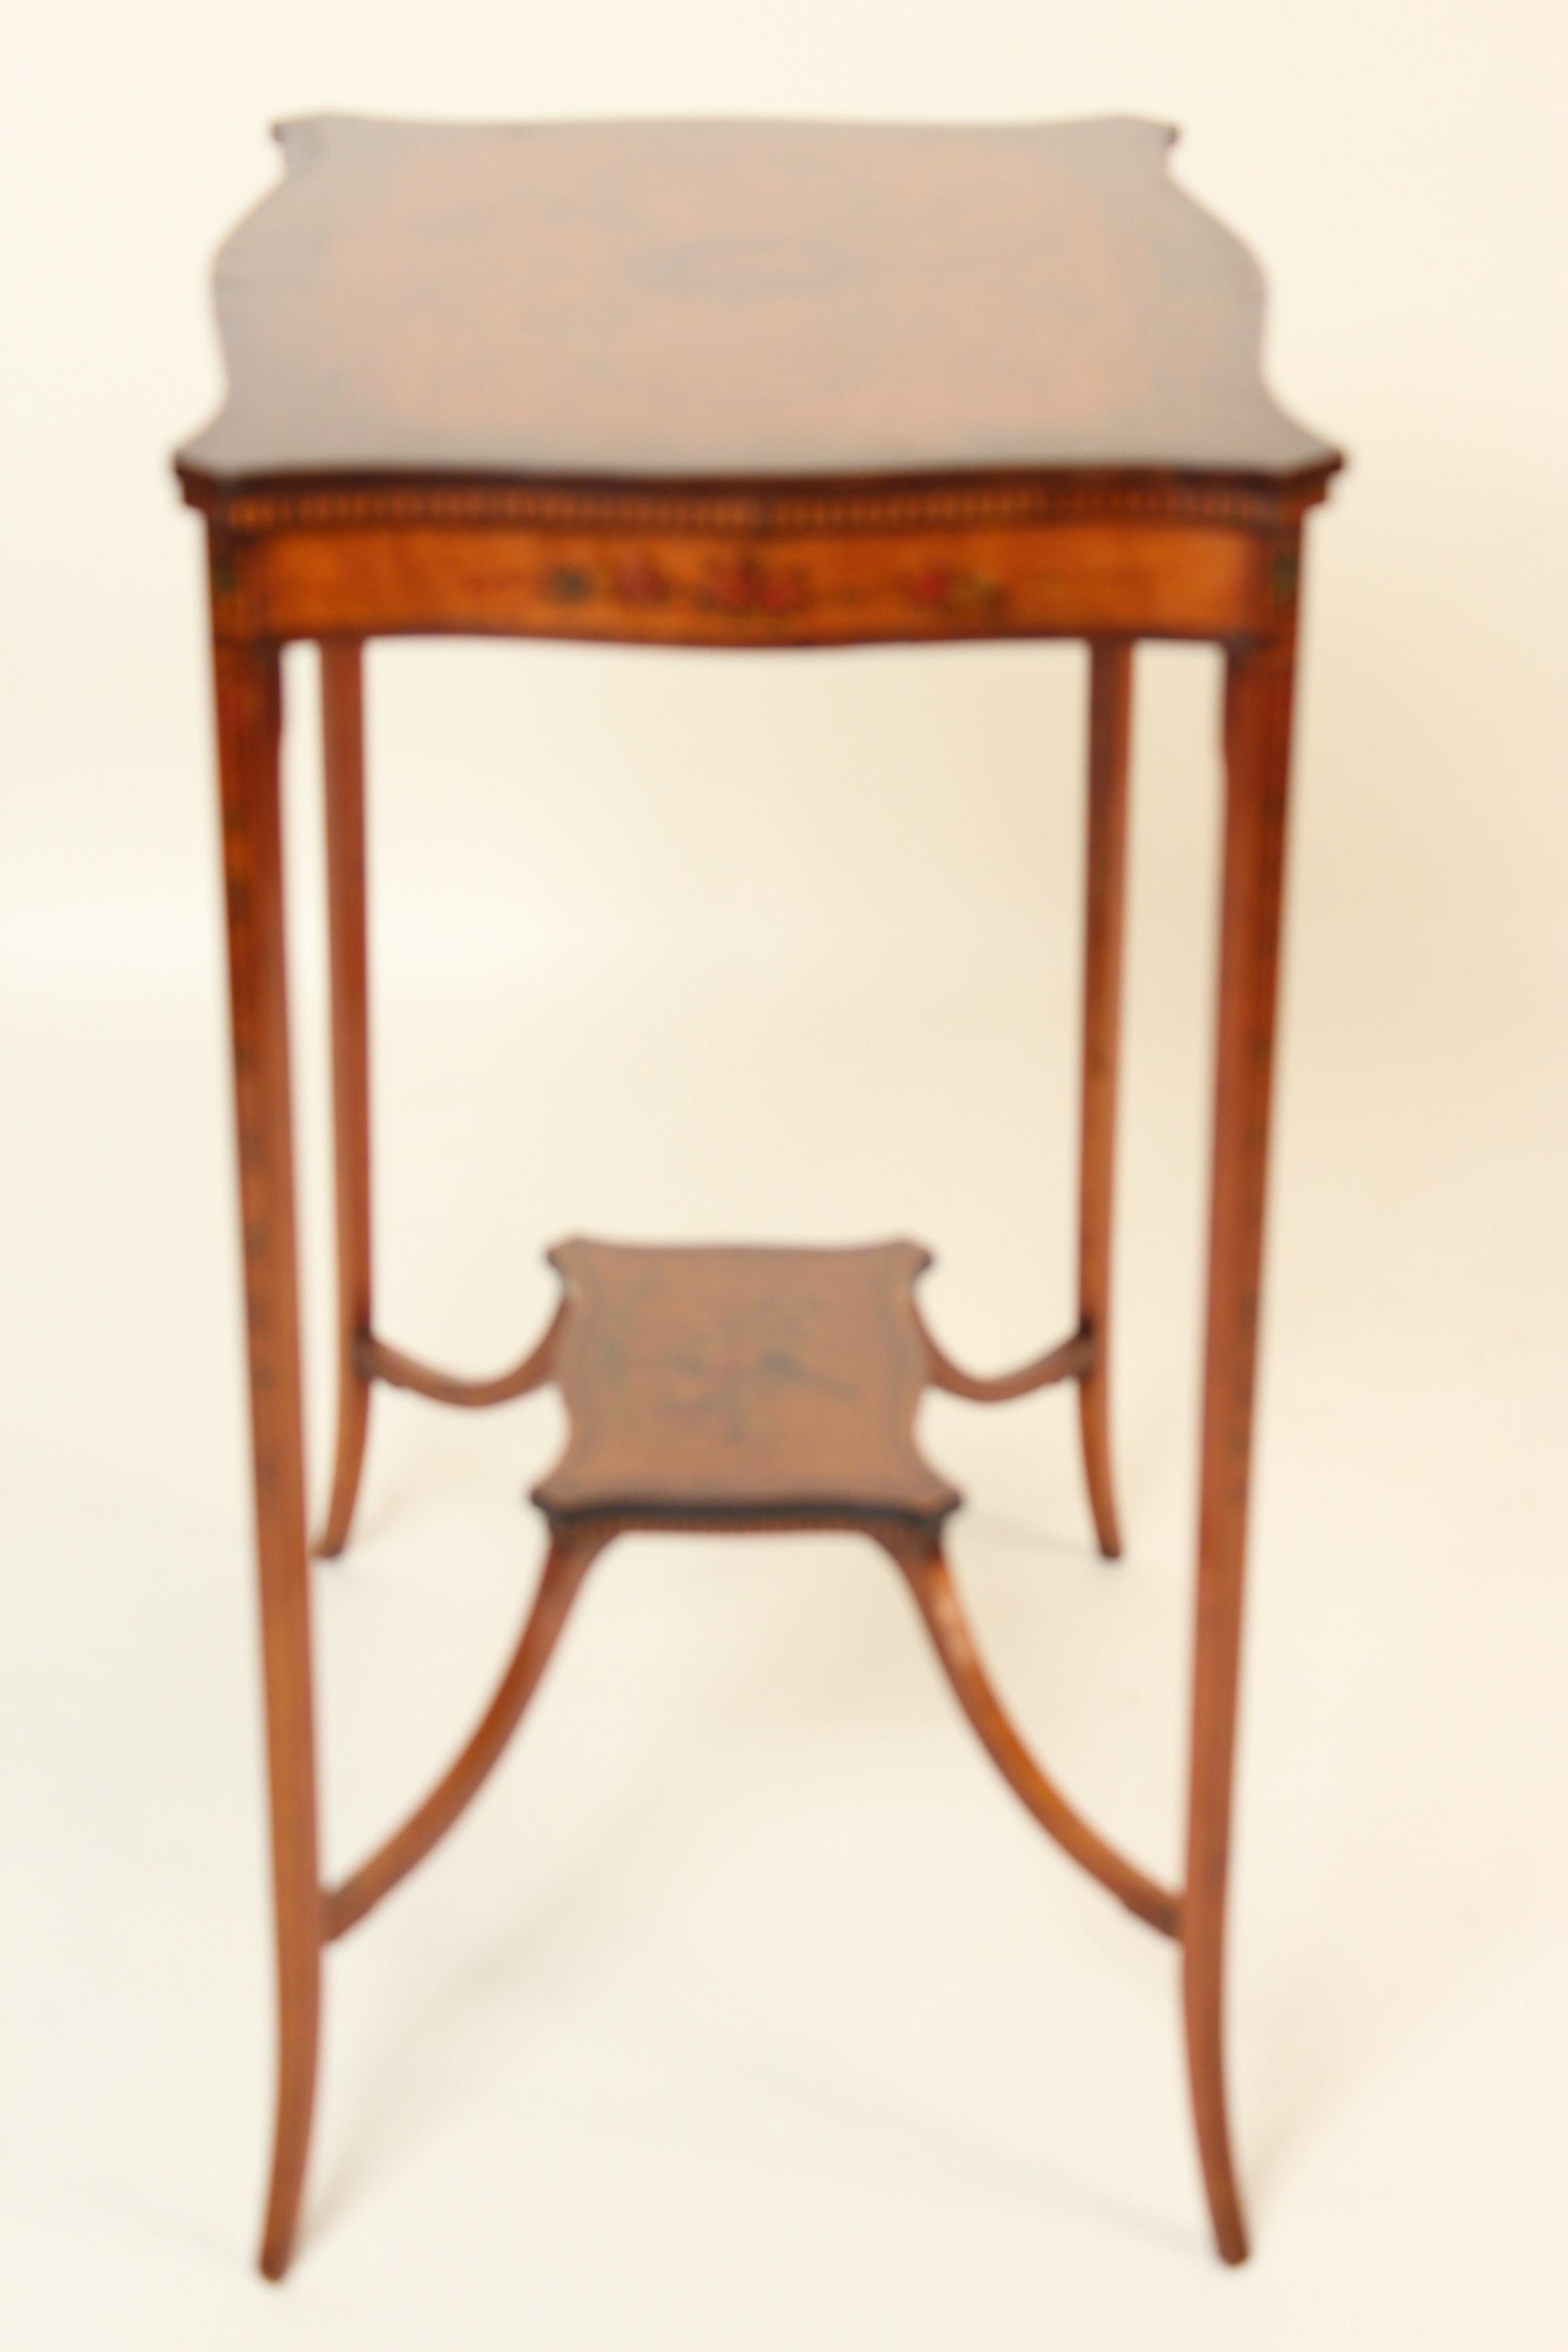 Early 20th Century English Edwardian Painted Satinwood Occasional Table